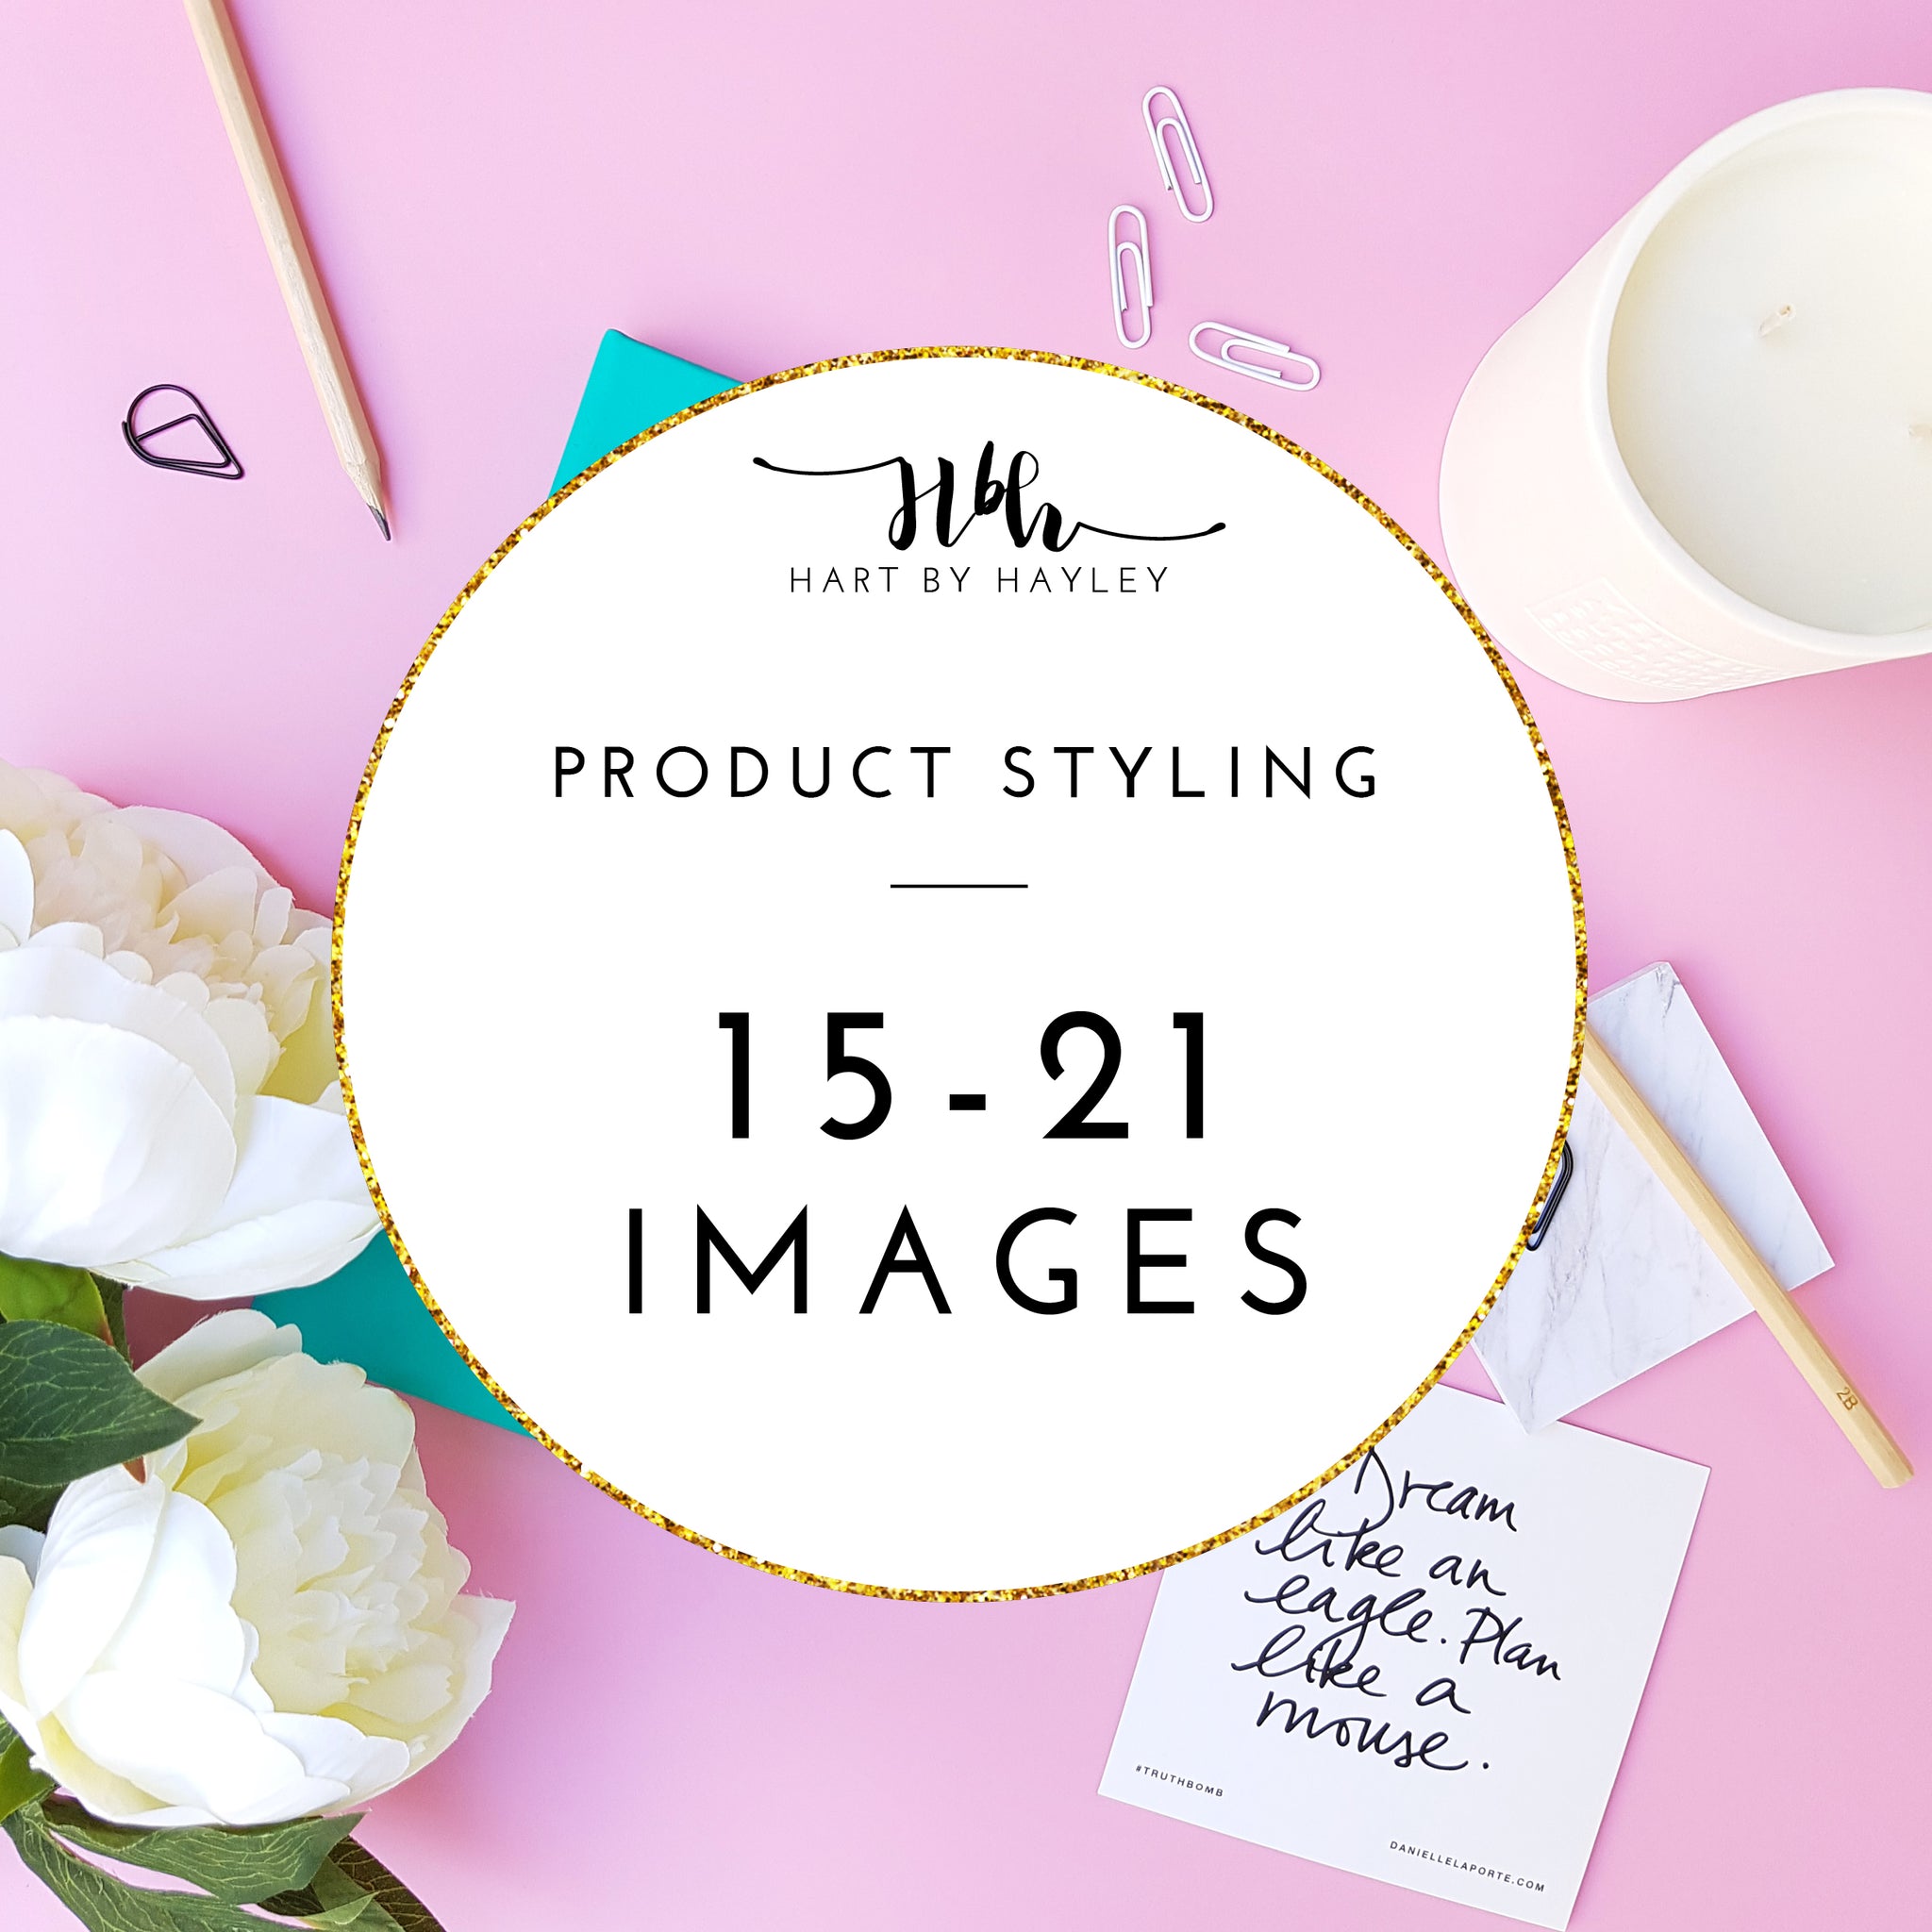 Product styling for 15-21 images